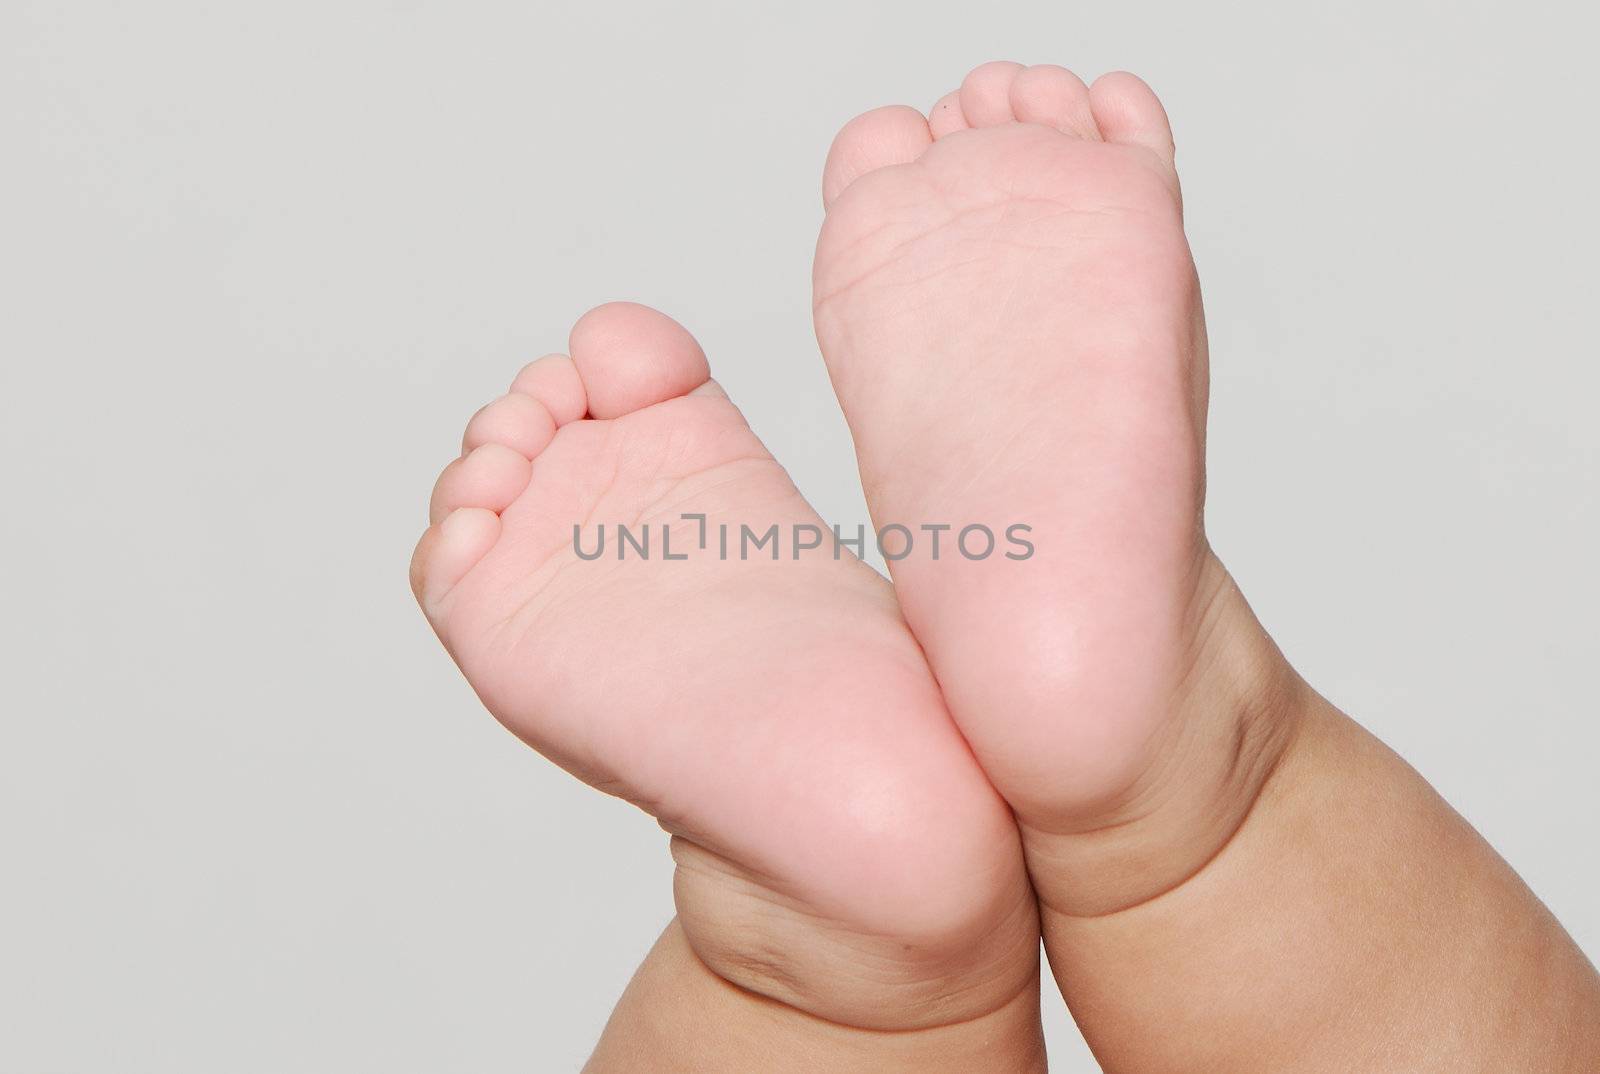 Legs of the baby on a light background